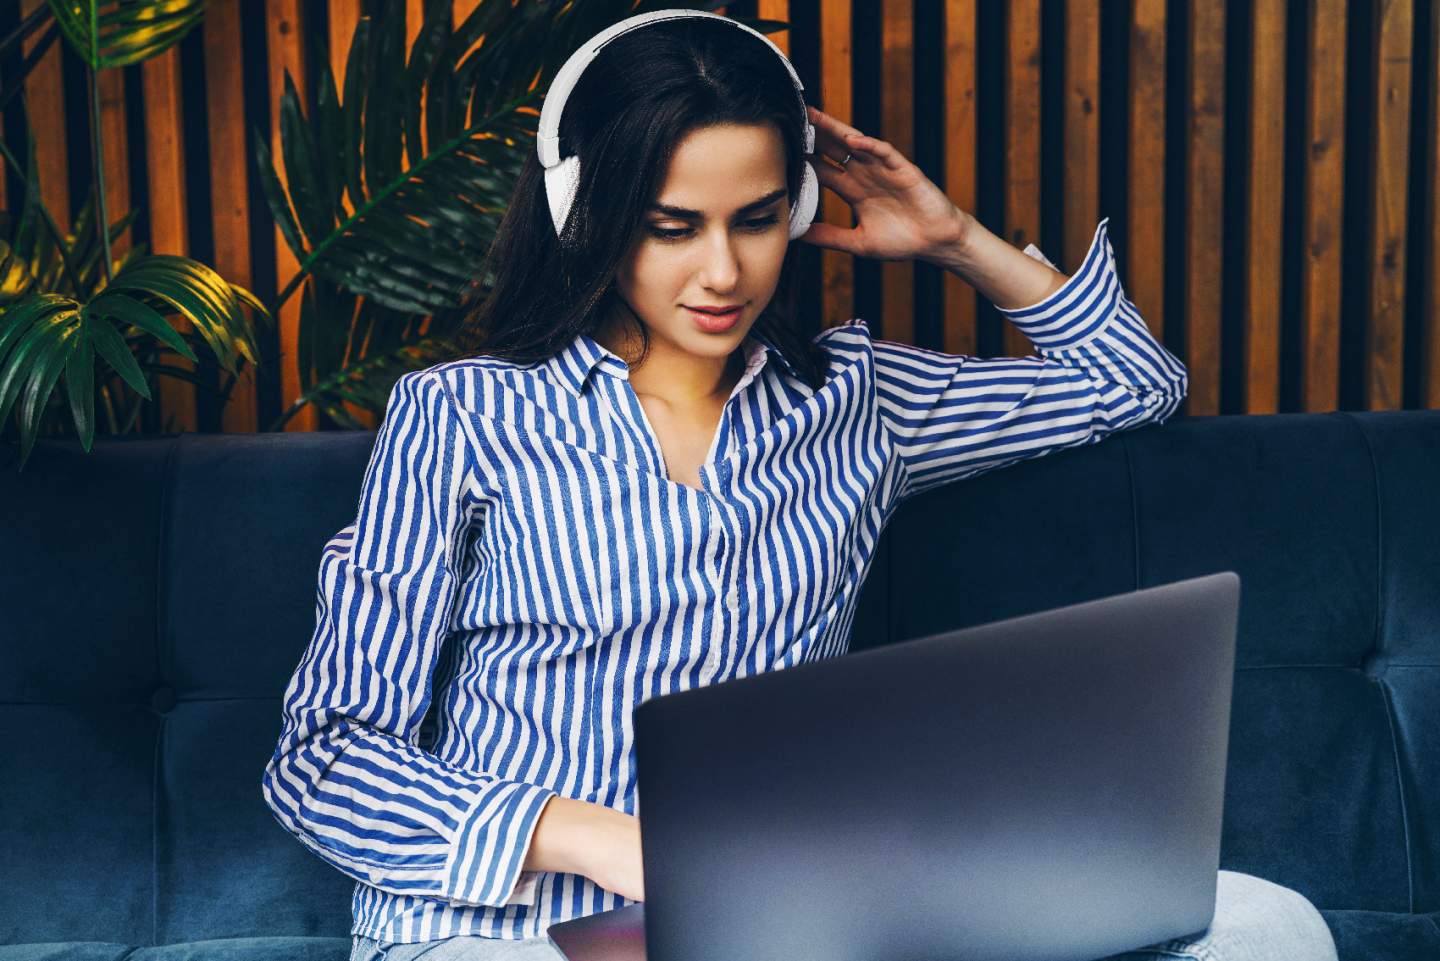 Woman listening to content on a laptop